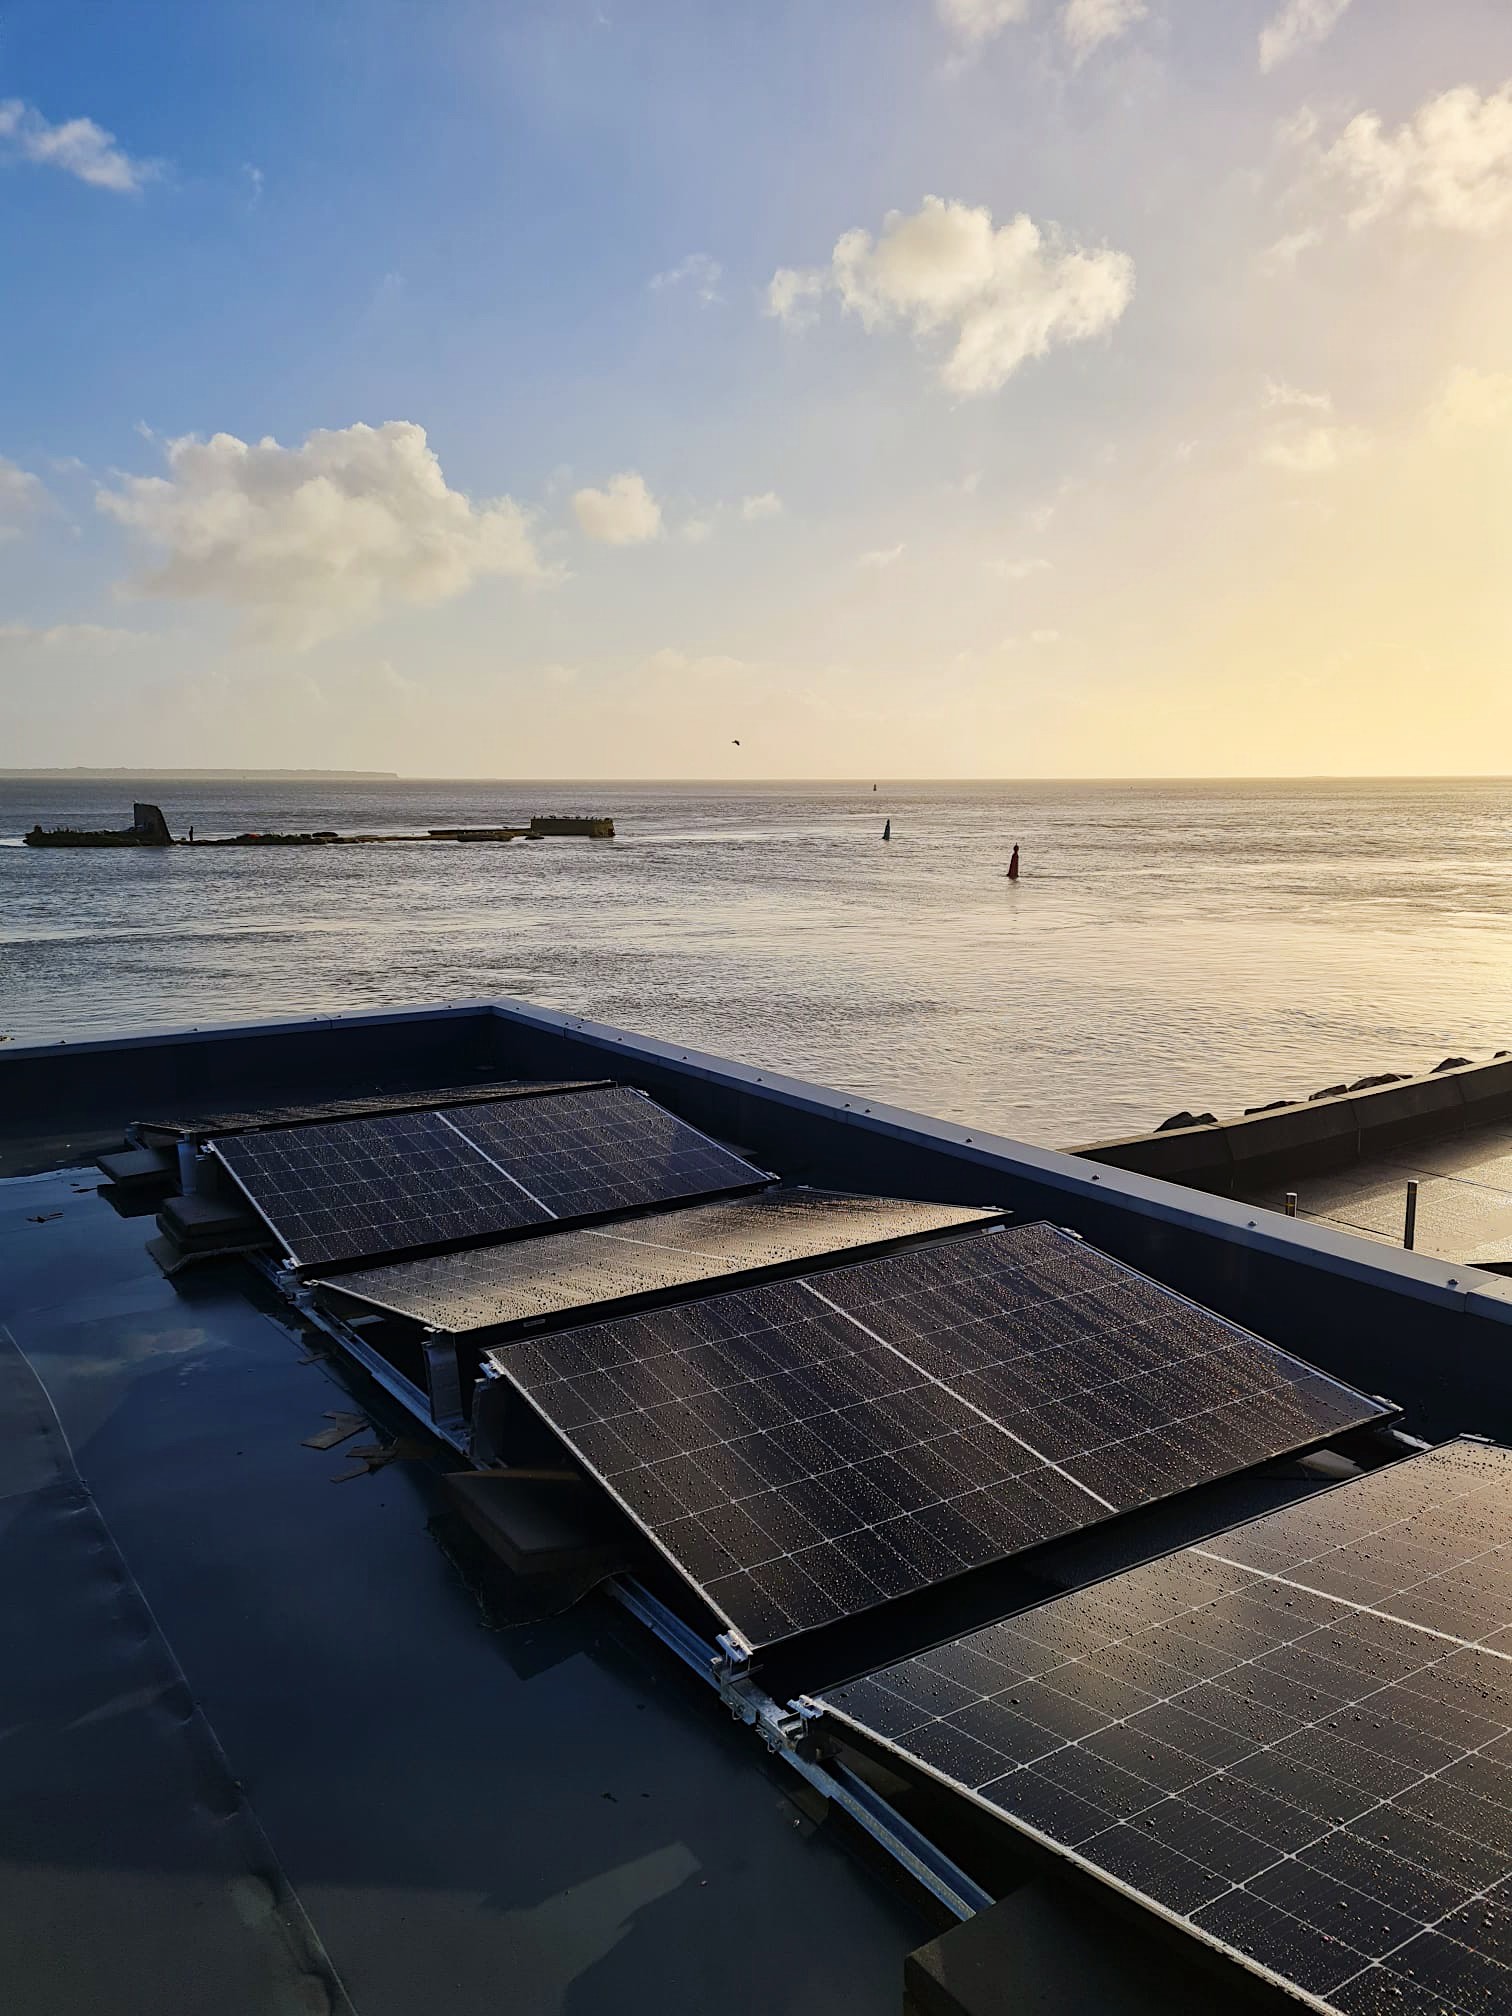 Three sets of PV solar panels on a roof, with the sea in the background at sunset.